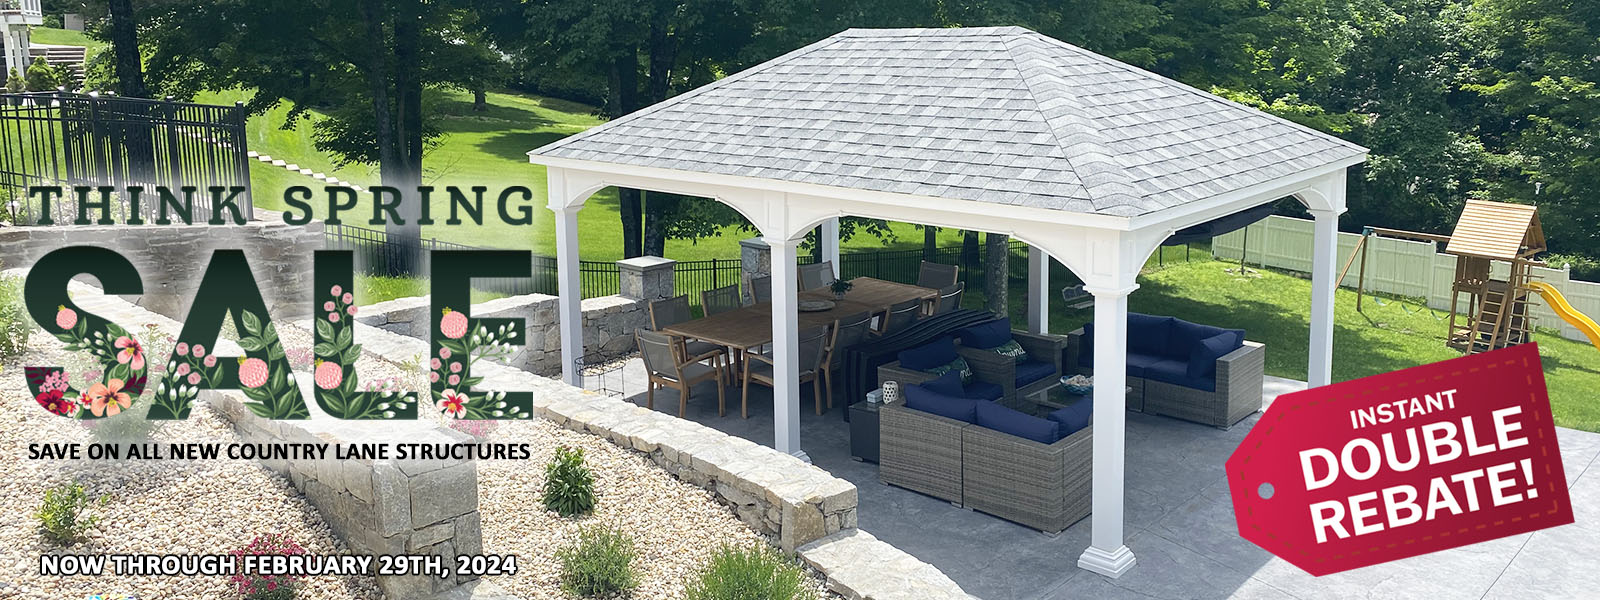 Think Spring Sale! Save on all new Country Lane structures! Instant double rebate! Now through February 29th, 2024